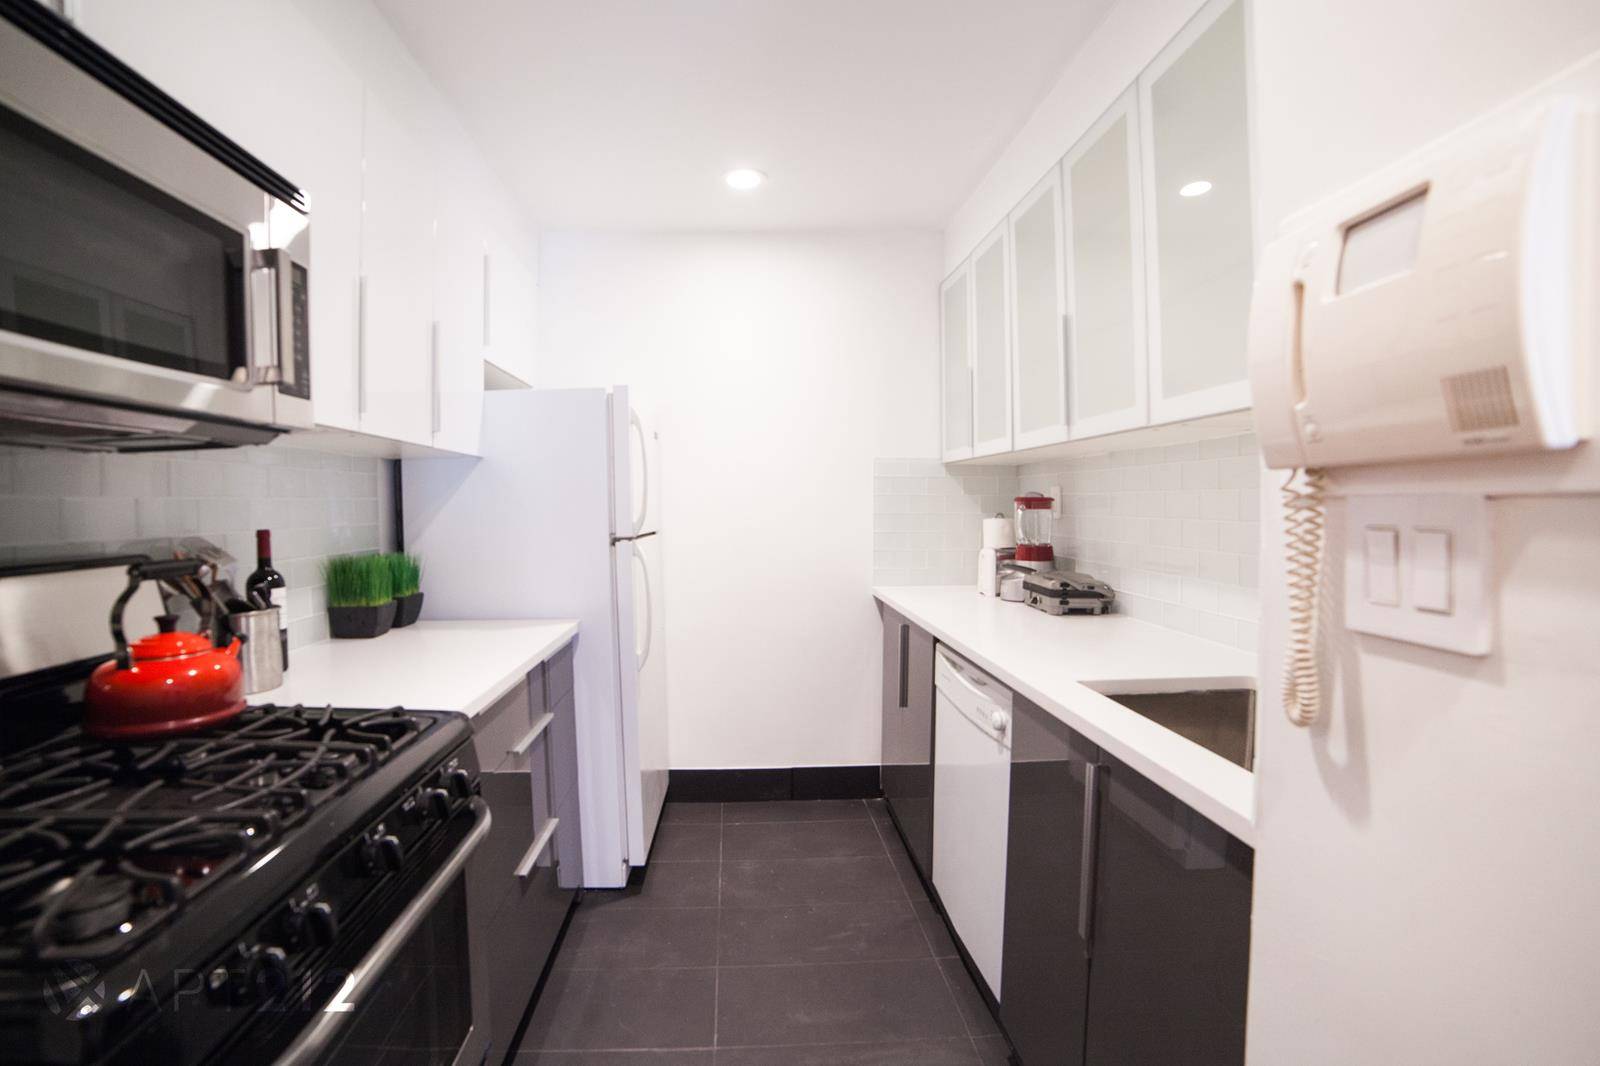 With 800 square feet, this one of a kindcondominium on the corner of Grand andMulberry, in the heart of NoLita, featuresa 2 bedroom, 1 bathroom residence, Withbrand new European finishes, ...